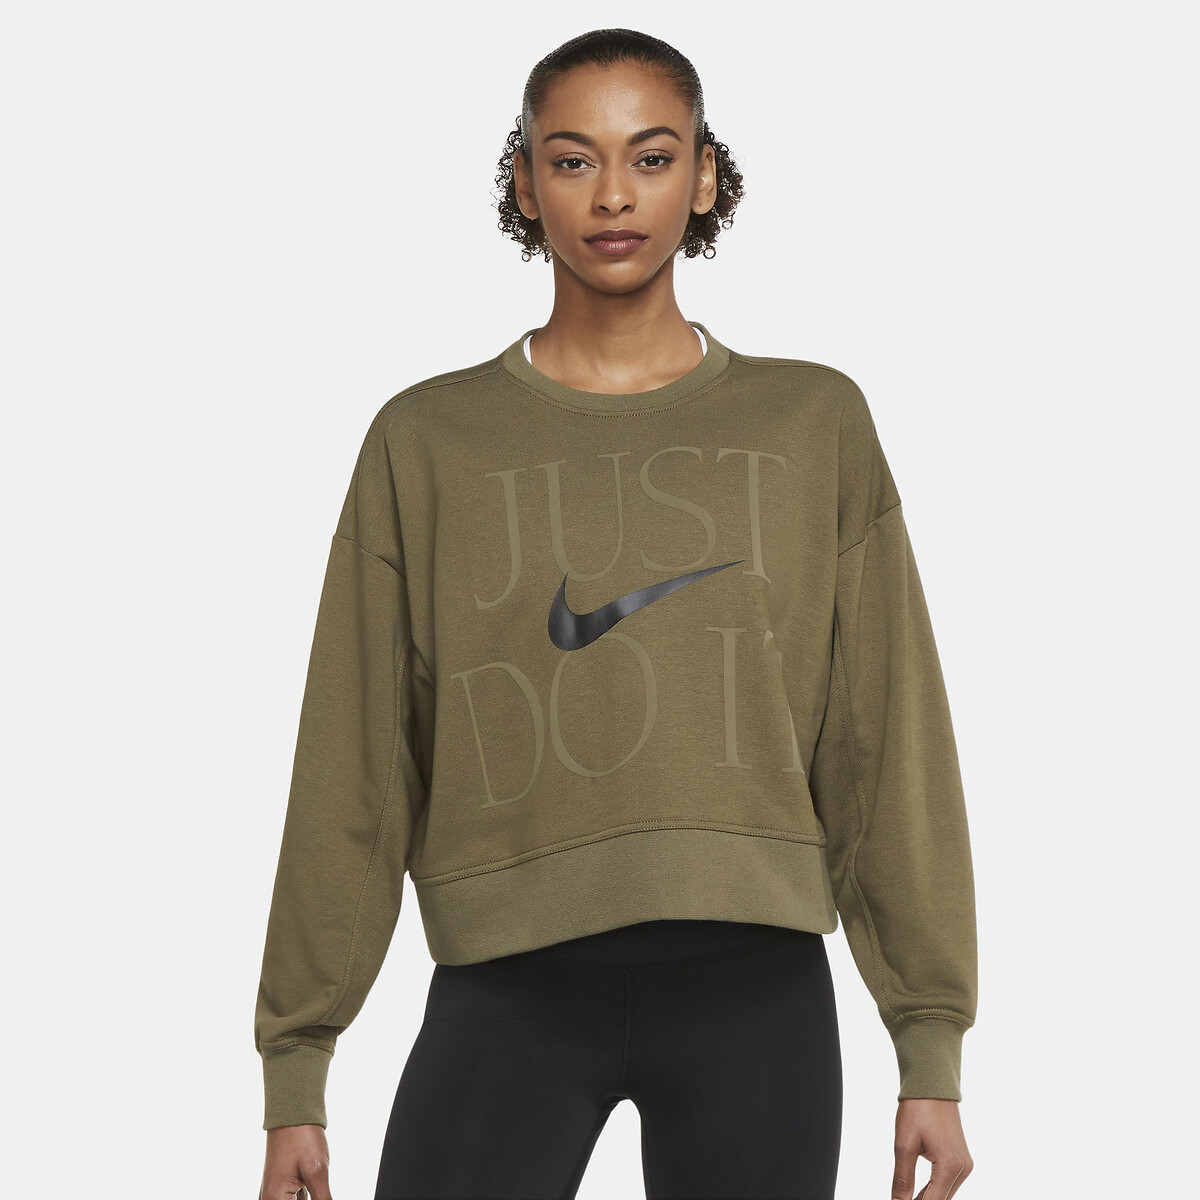 Image of Dri-Fit Get Fit Sports Sweatshirt in Cotton Mix